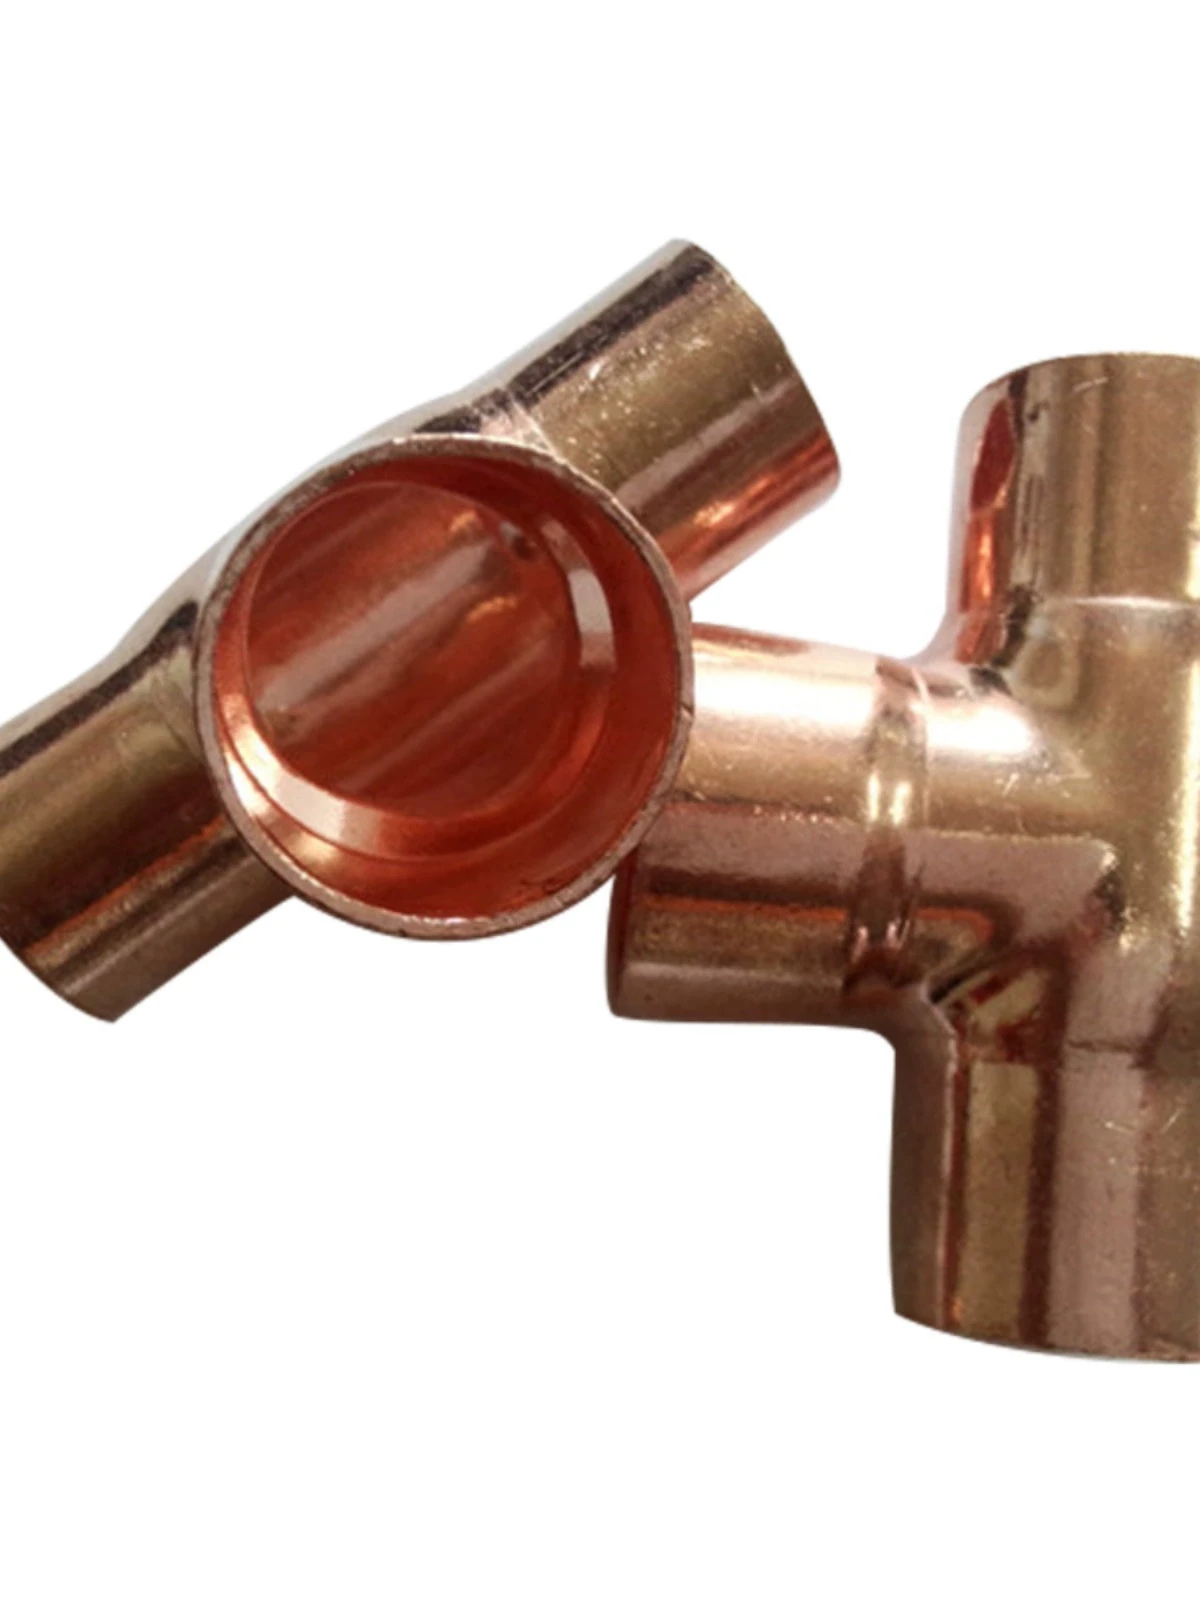 Copper tee 6-25.4 equal Copper tee